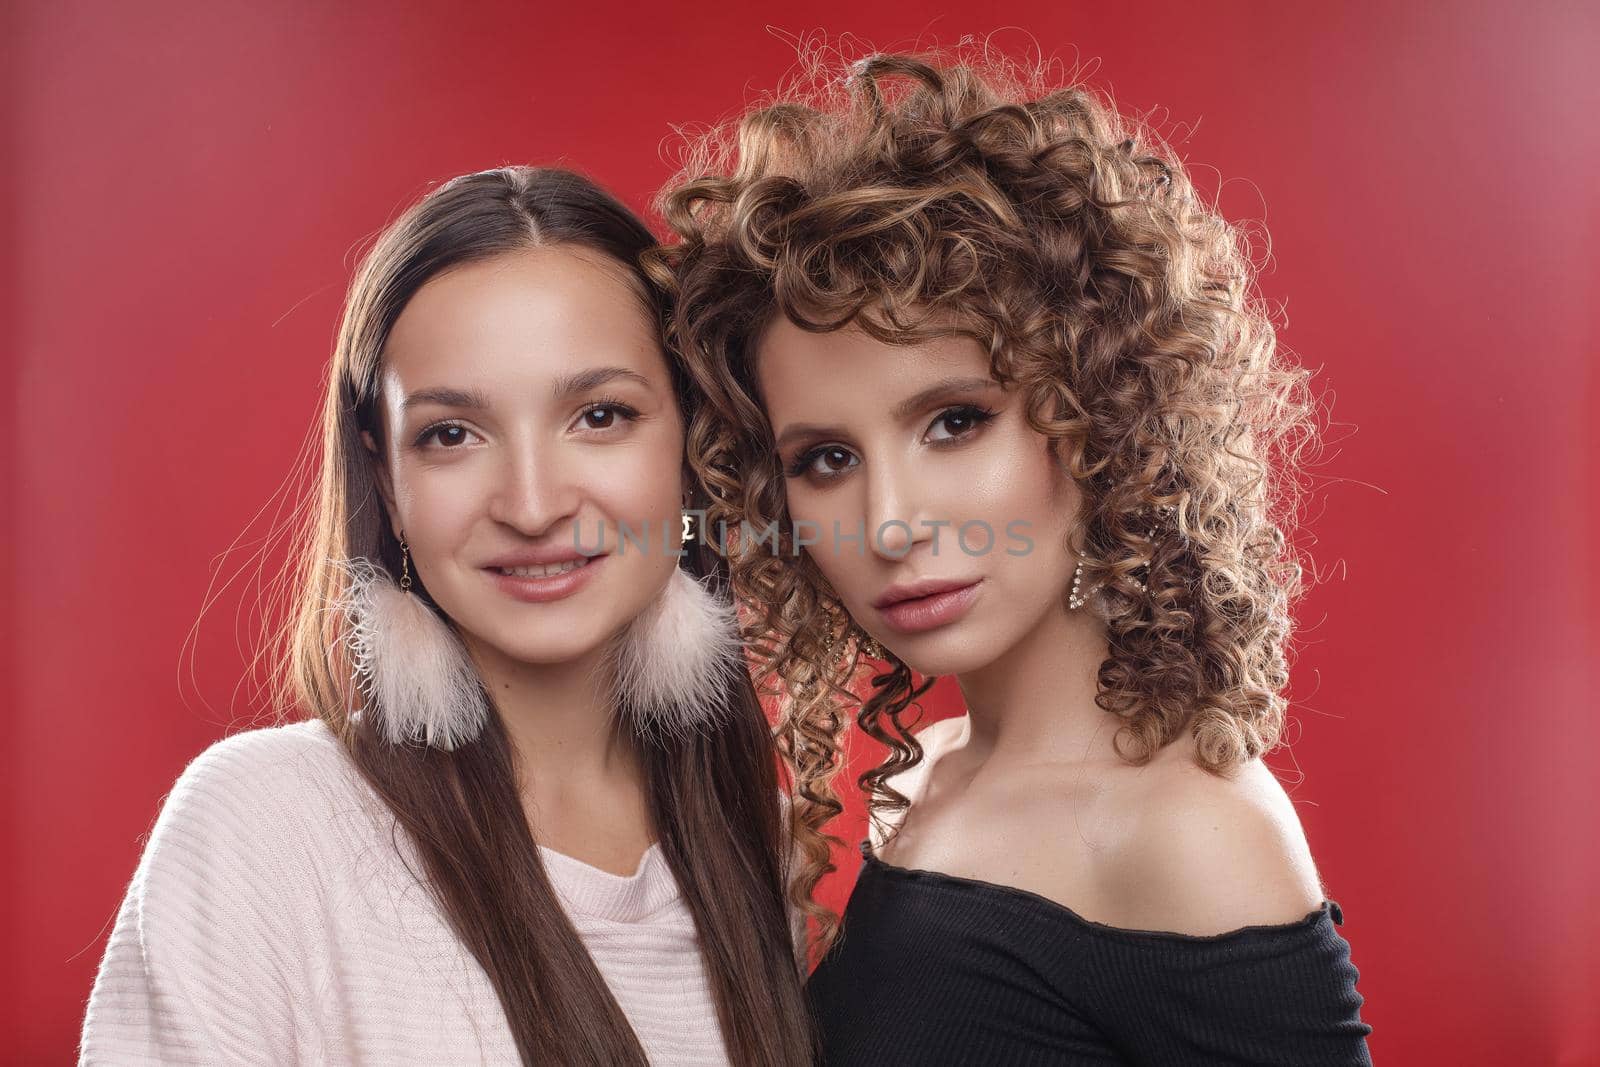 Portrait of two beautiful glamour girls in black and white standing together. Young model with curly hair leaning on her friend's shoulder. Happy pretty lady with pink feather earrings smiling shyly.